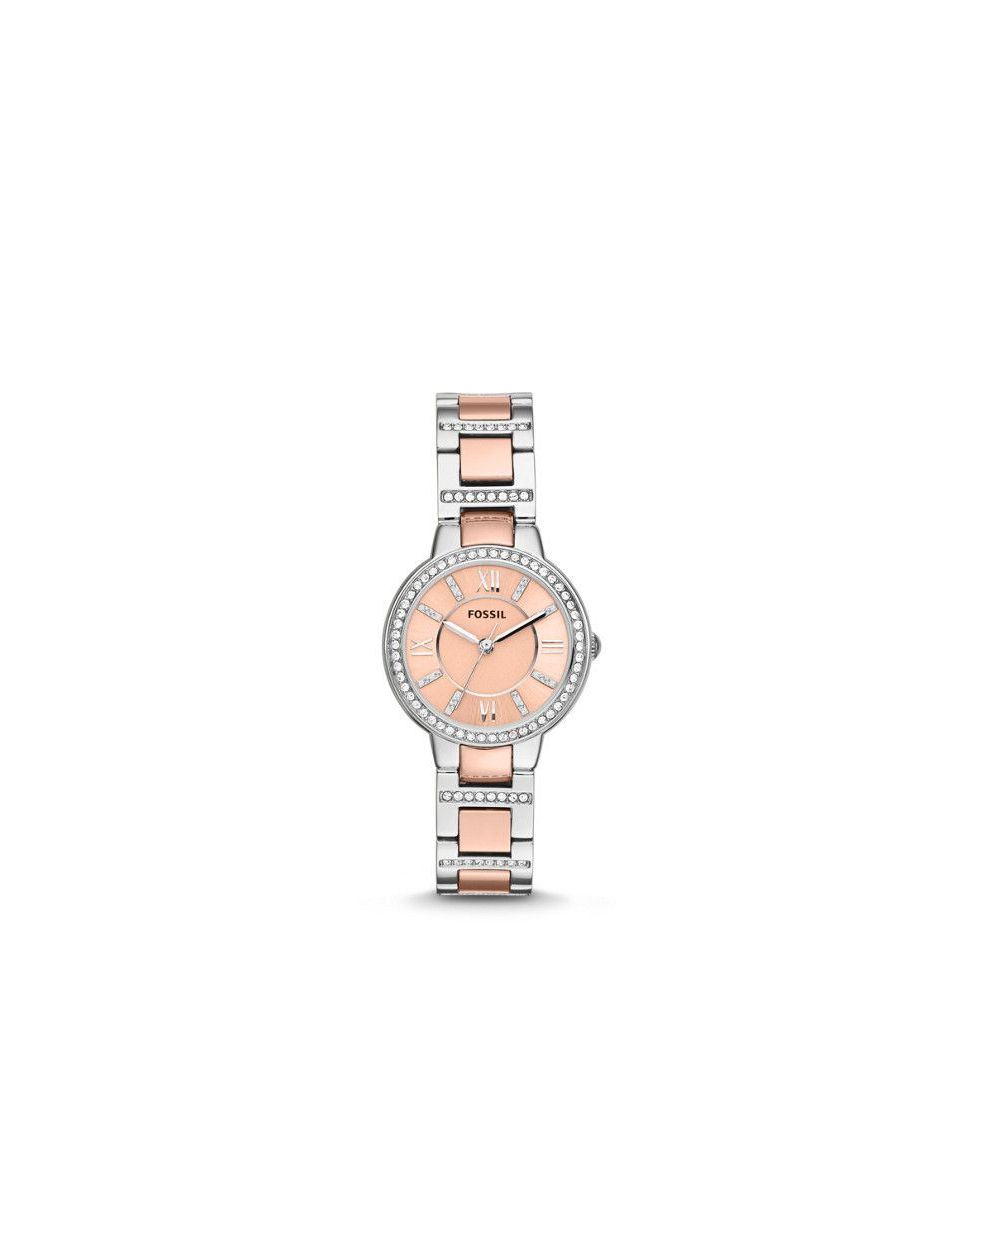 Fossil - Watch Virginia three stainless steel needles - Bicolor